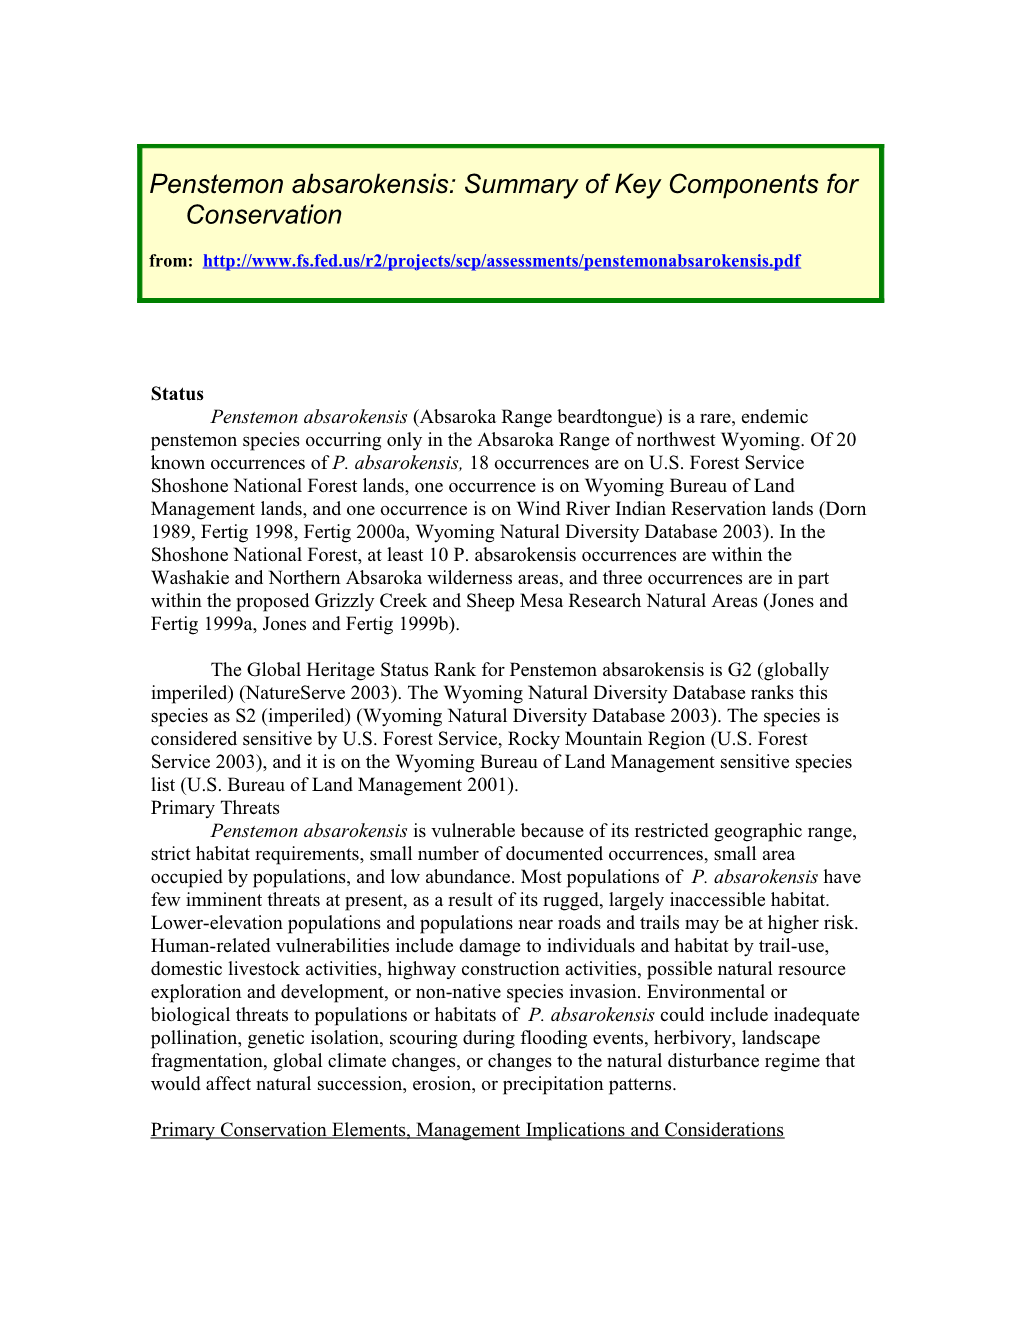 Summary of Key Components for Conservation of Penstemon Absarokensis